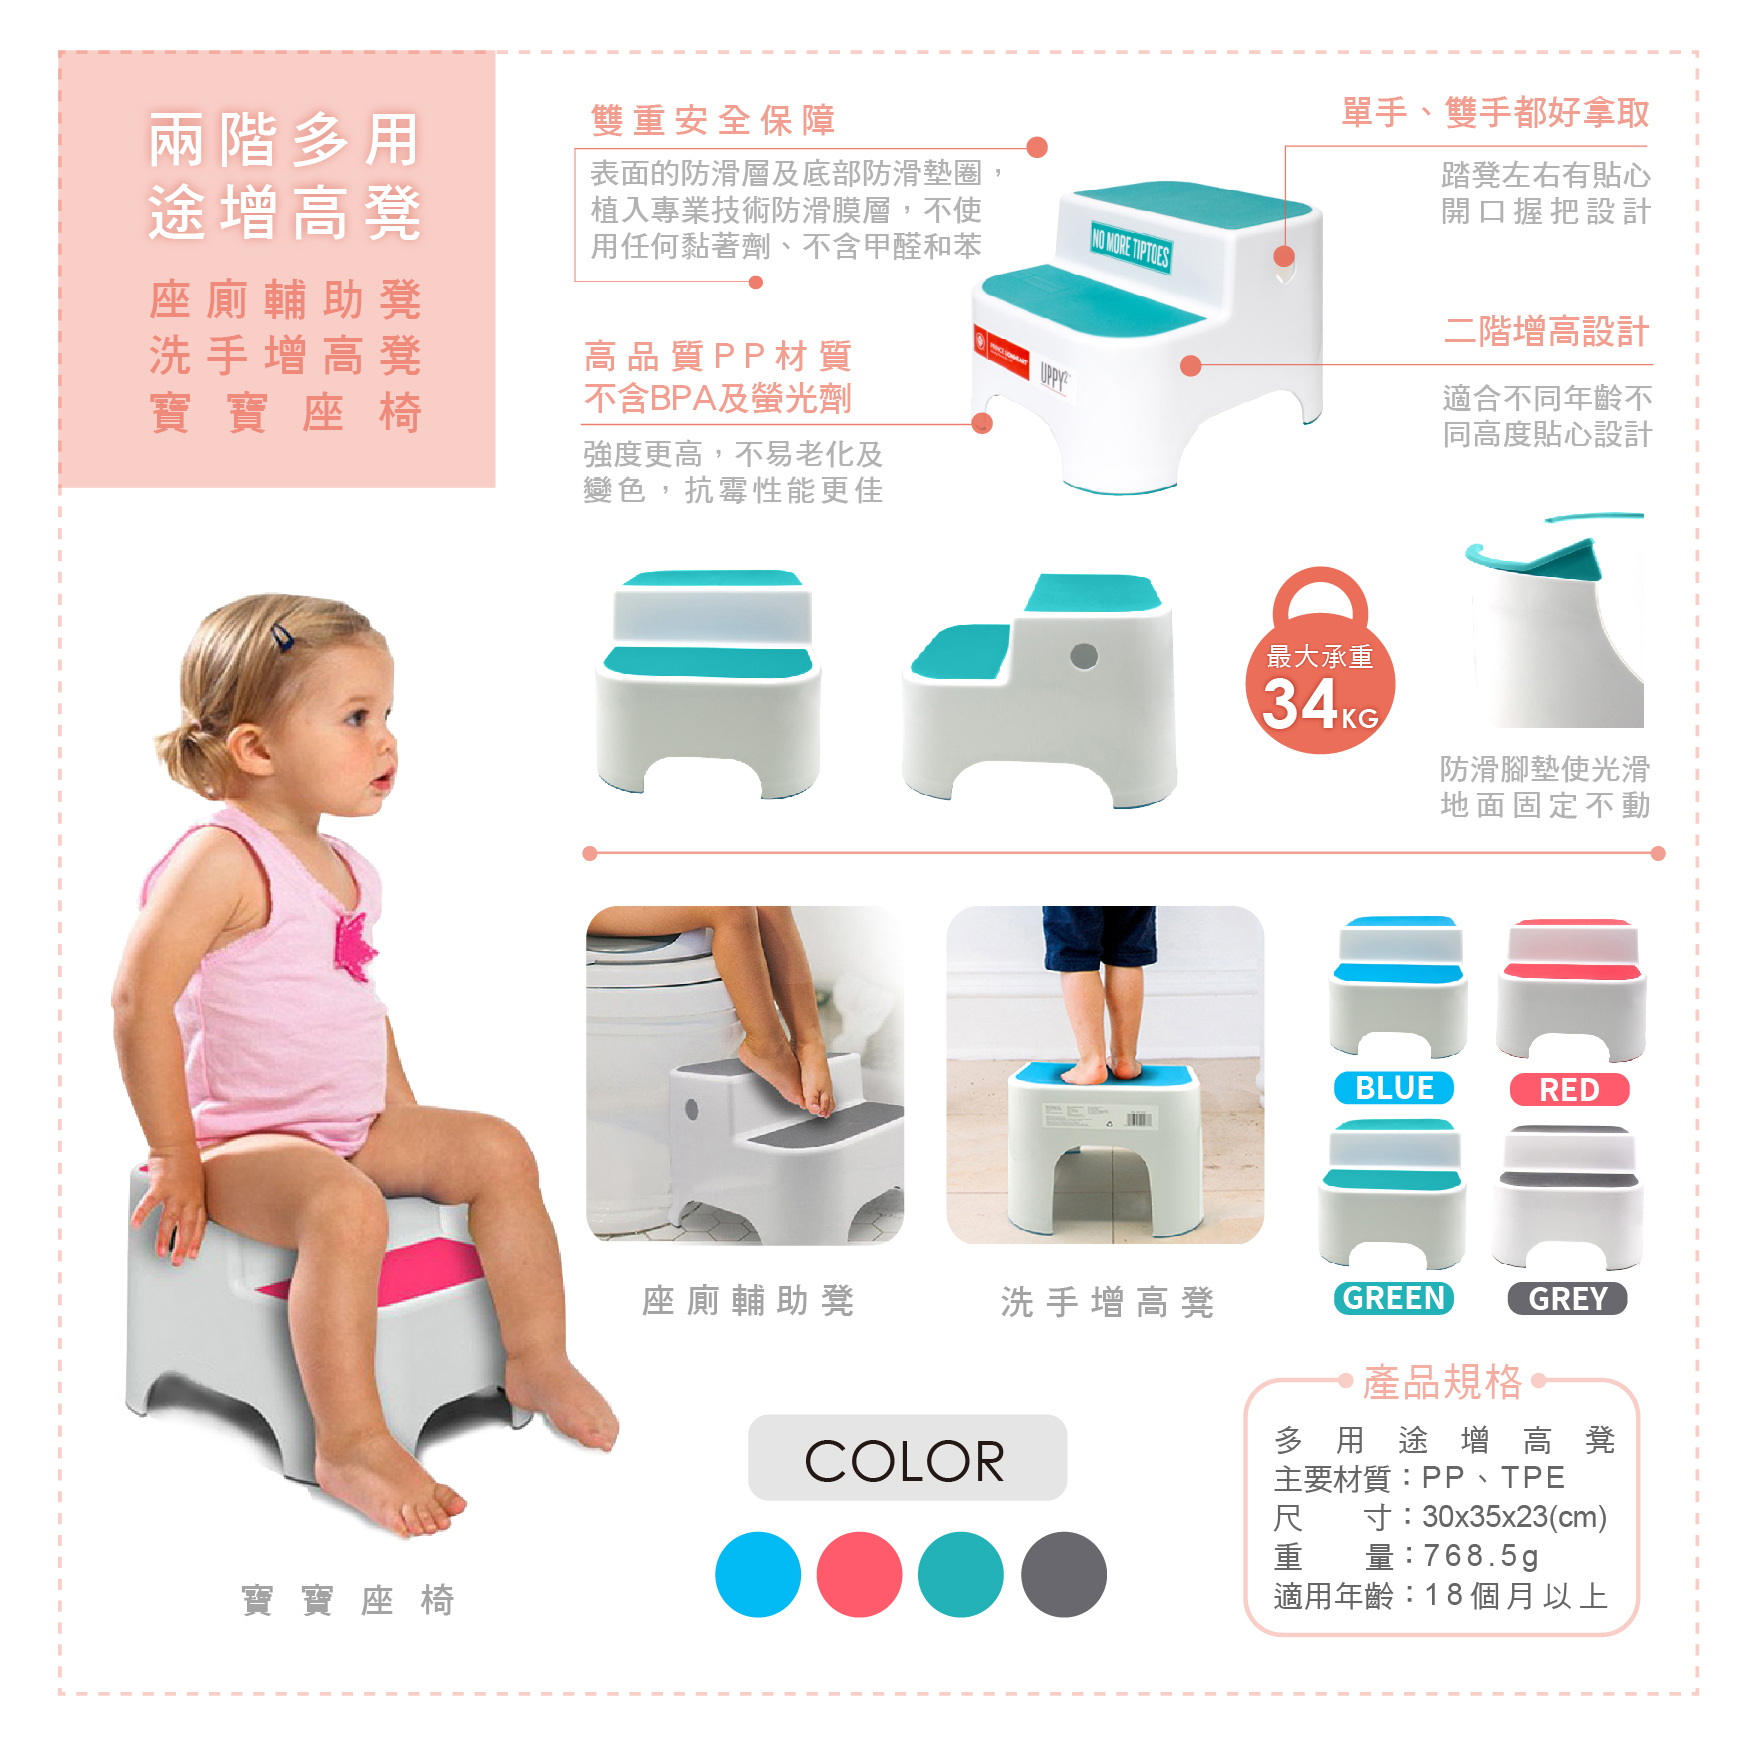 [American Prince Lionheart] Two-stage multi-purpose booster stool - 7 colors available